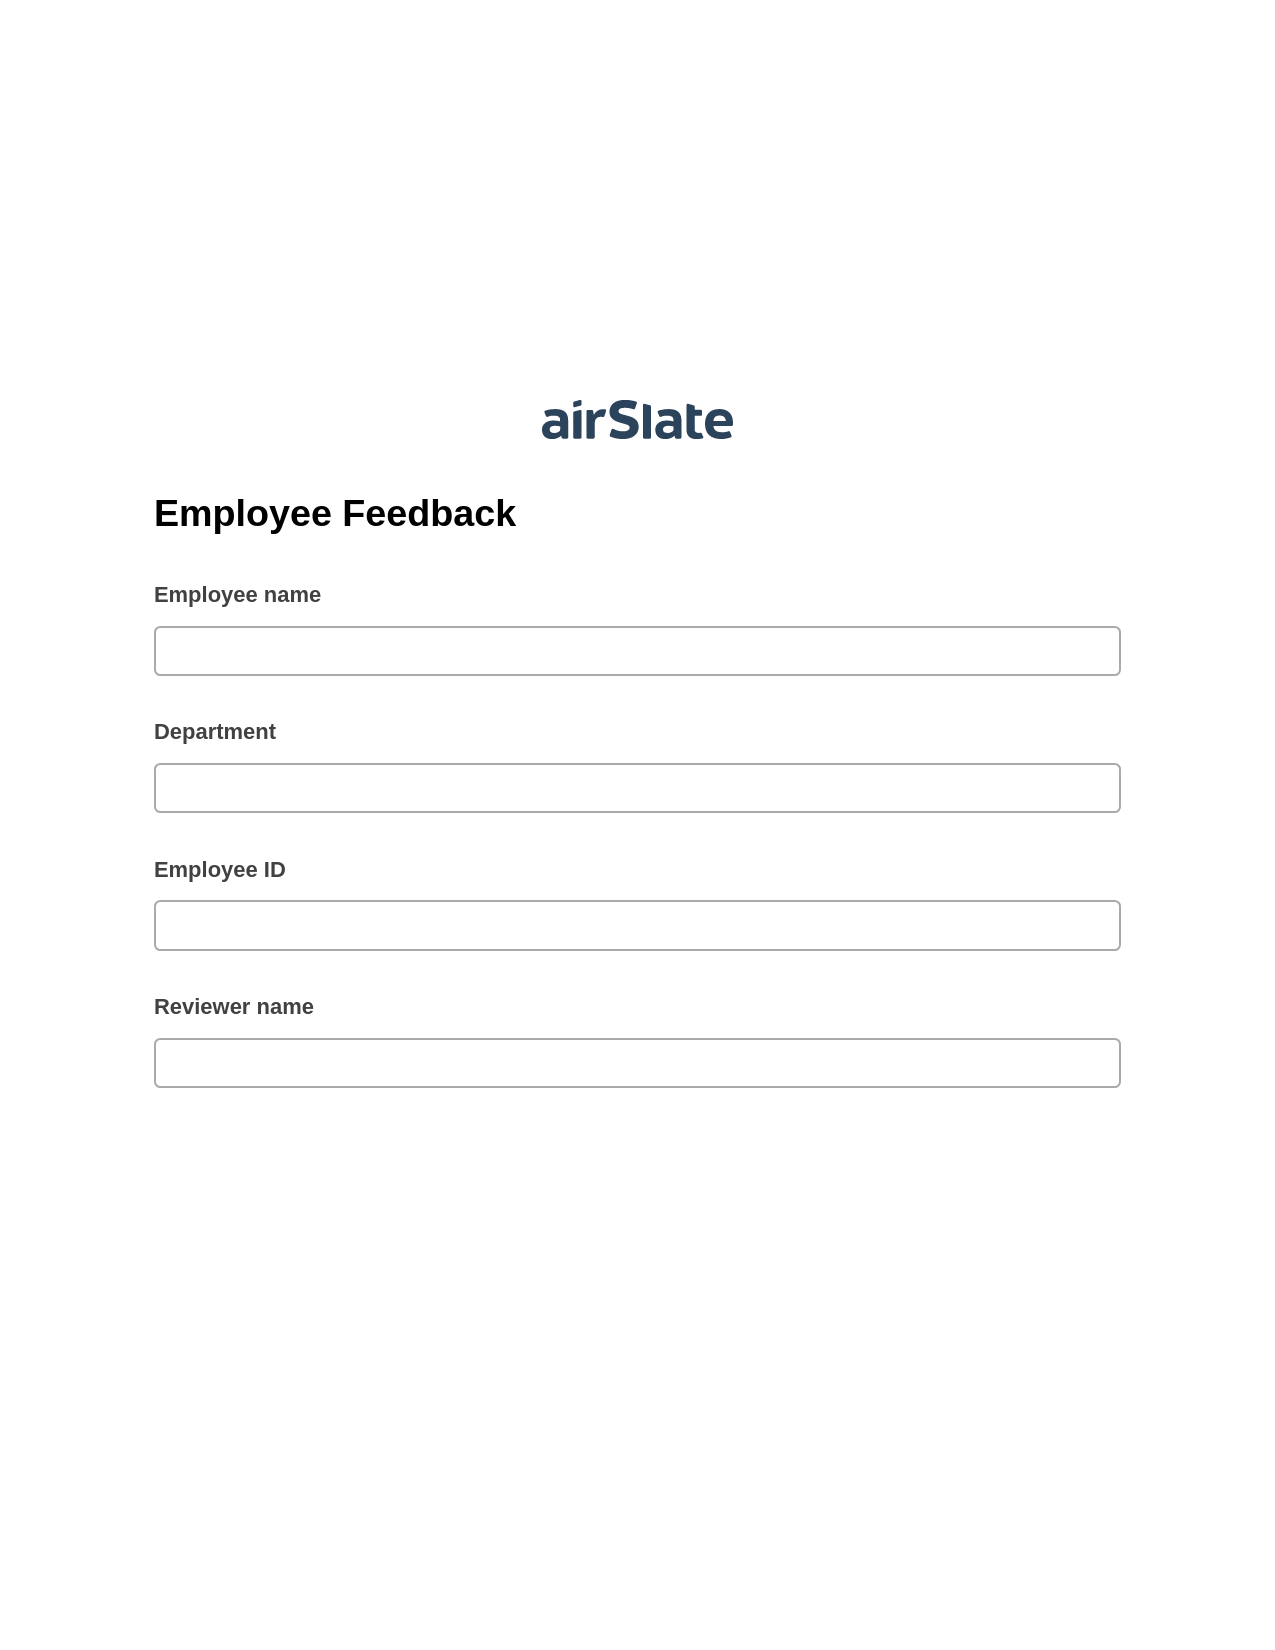 Employee Feedback Pre-fill Slate from MS Dynamics 365 Records Bot, Export to MS Dynamics 365 Bot, Webhook Postfinish Bot